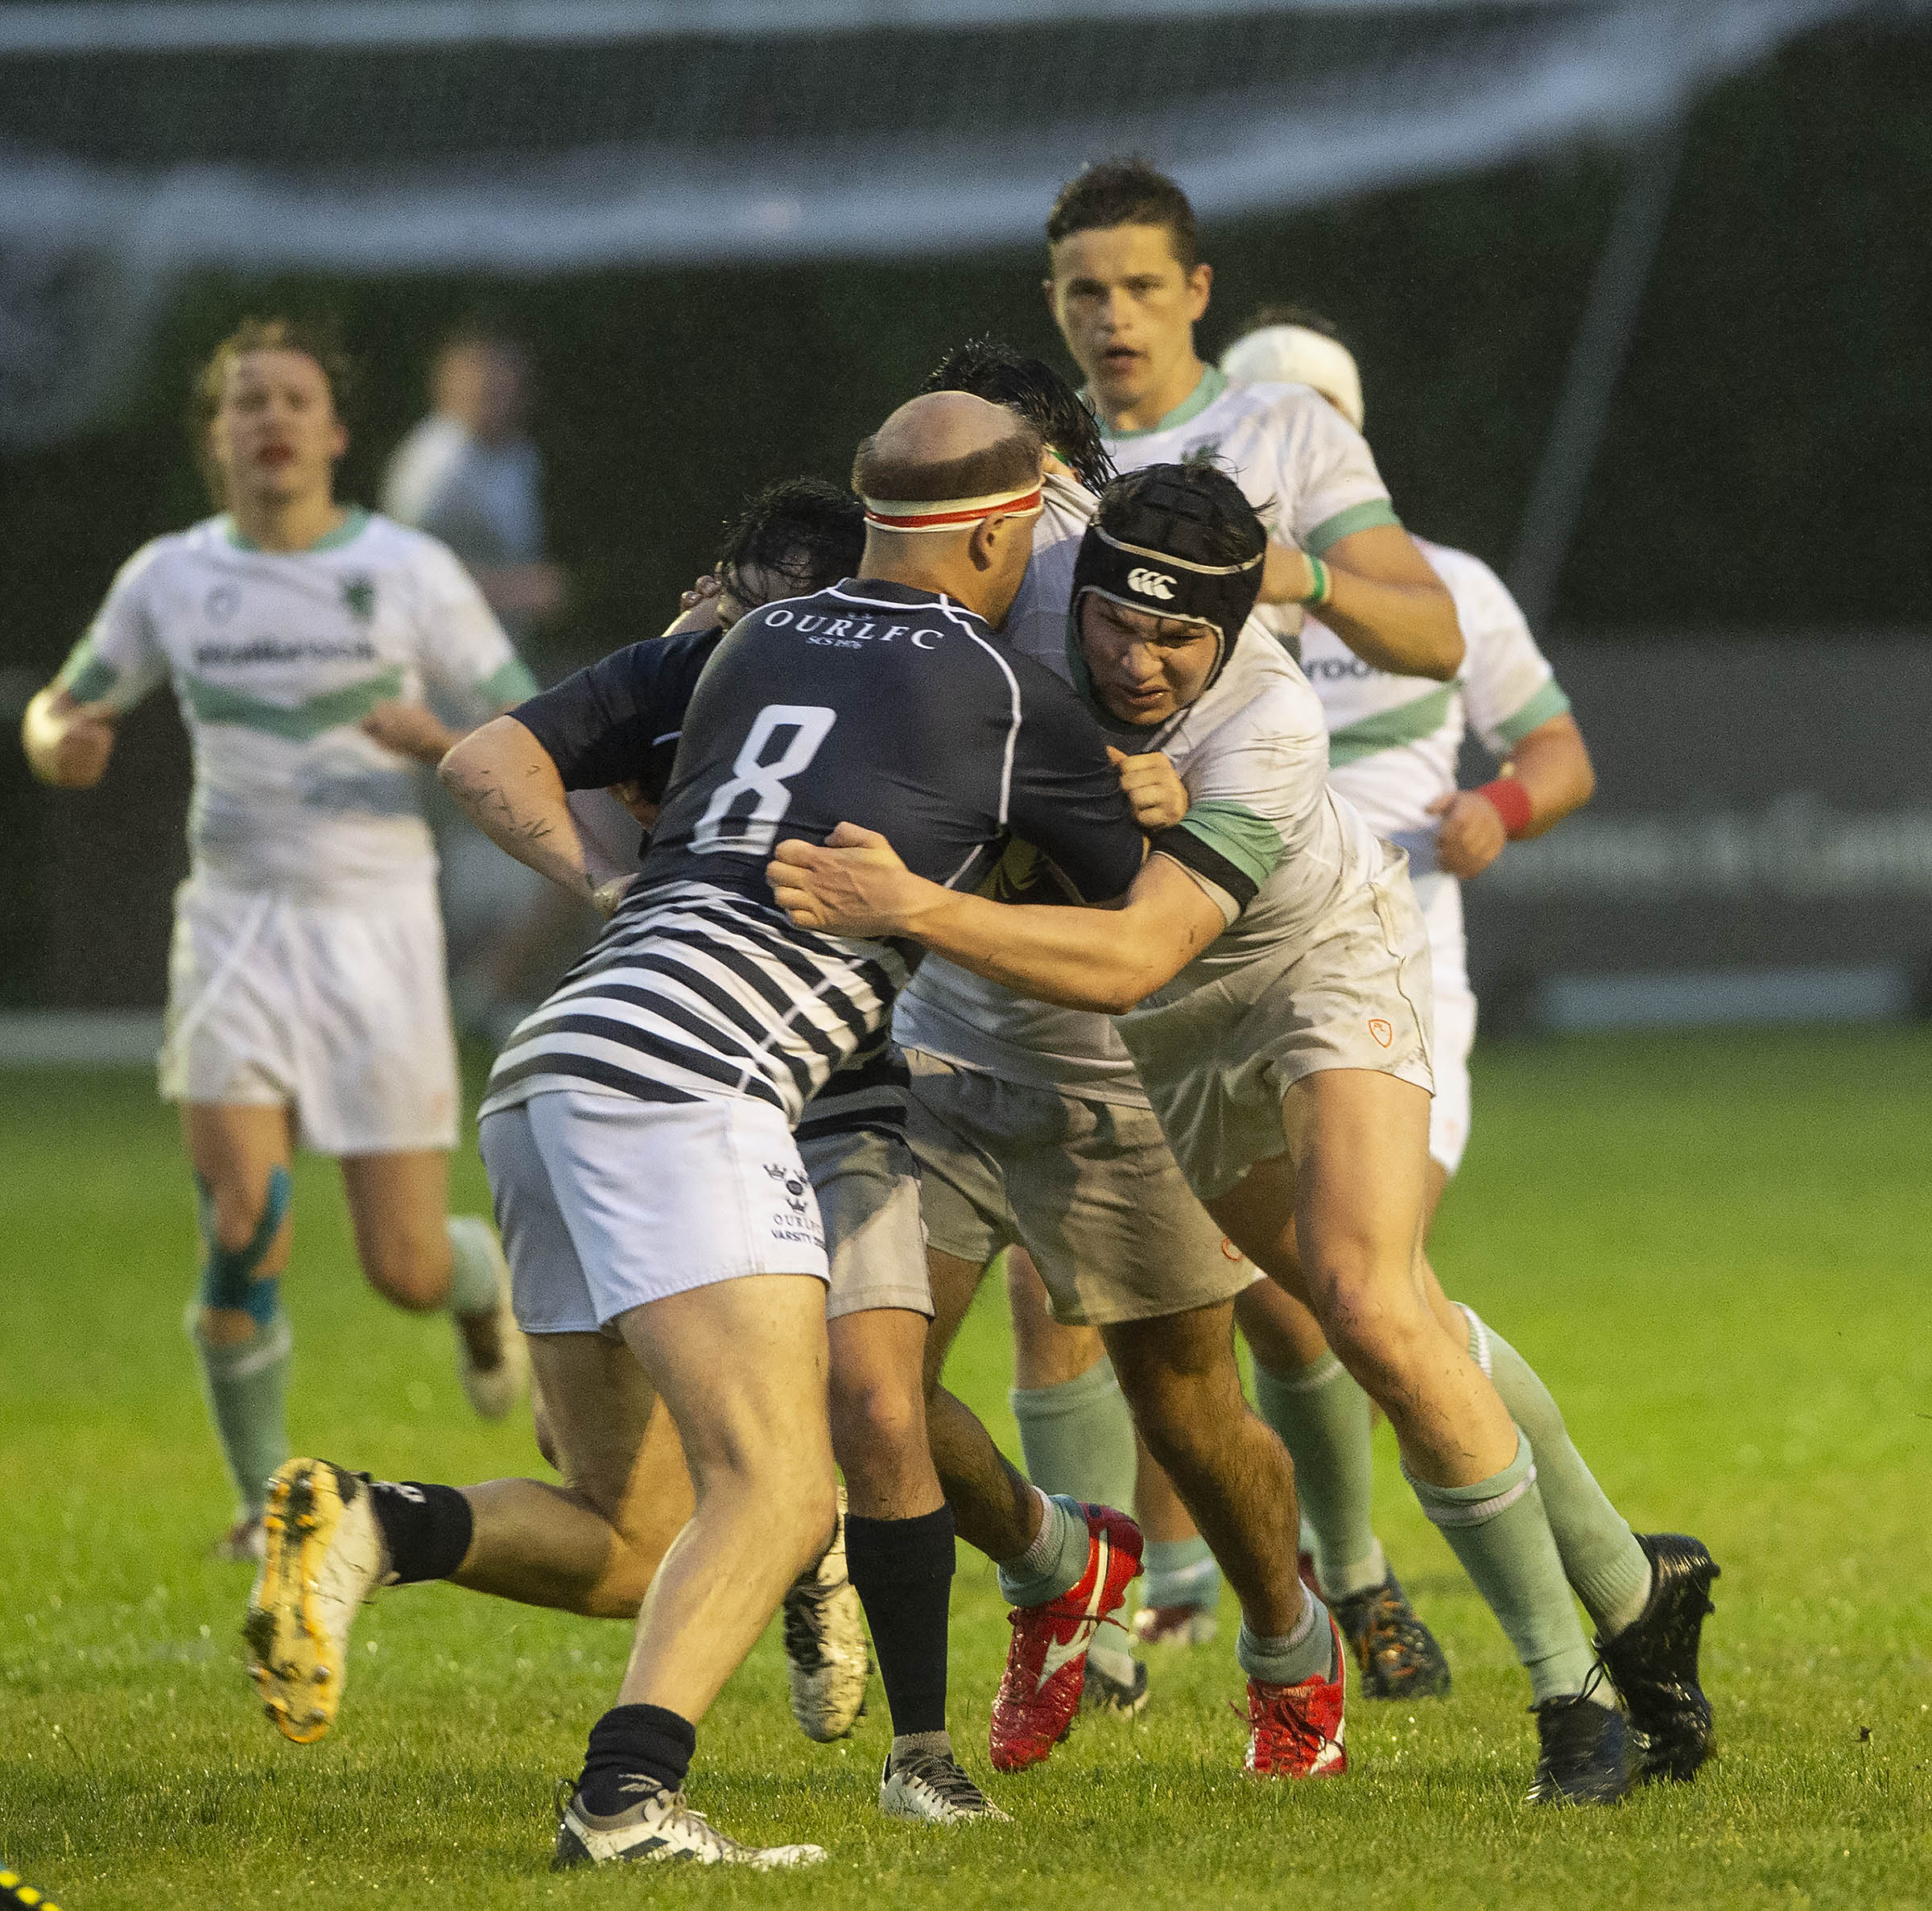 2021 Varsity Rugby League. Cambridge beat Oxford 14-8 after 12 years of trying . The match played at Grange Road Cambridge in terrible conditions in front of a small but partisan crowd.